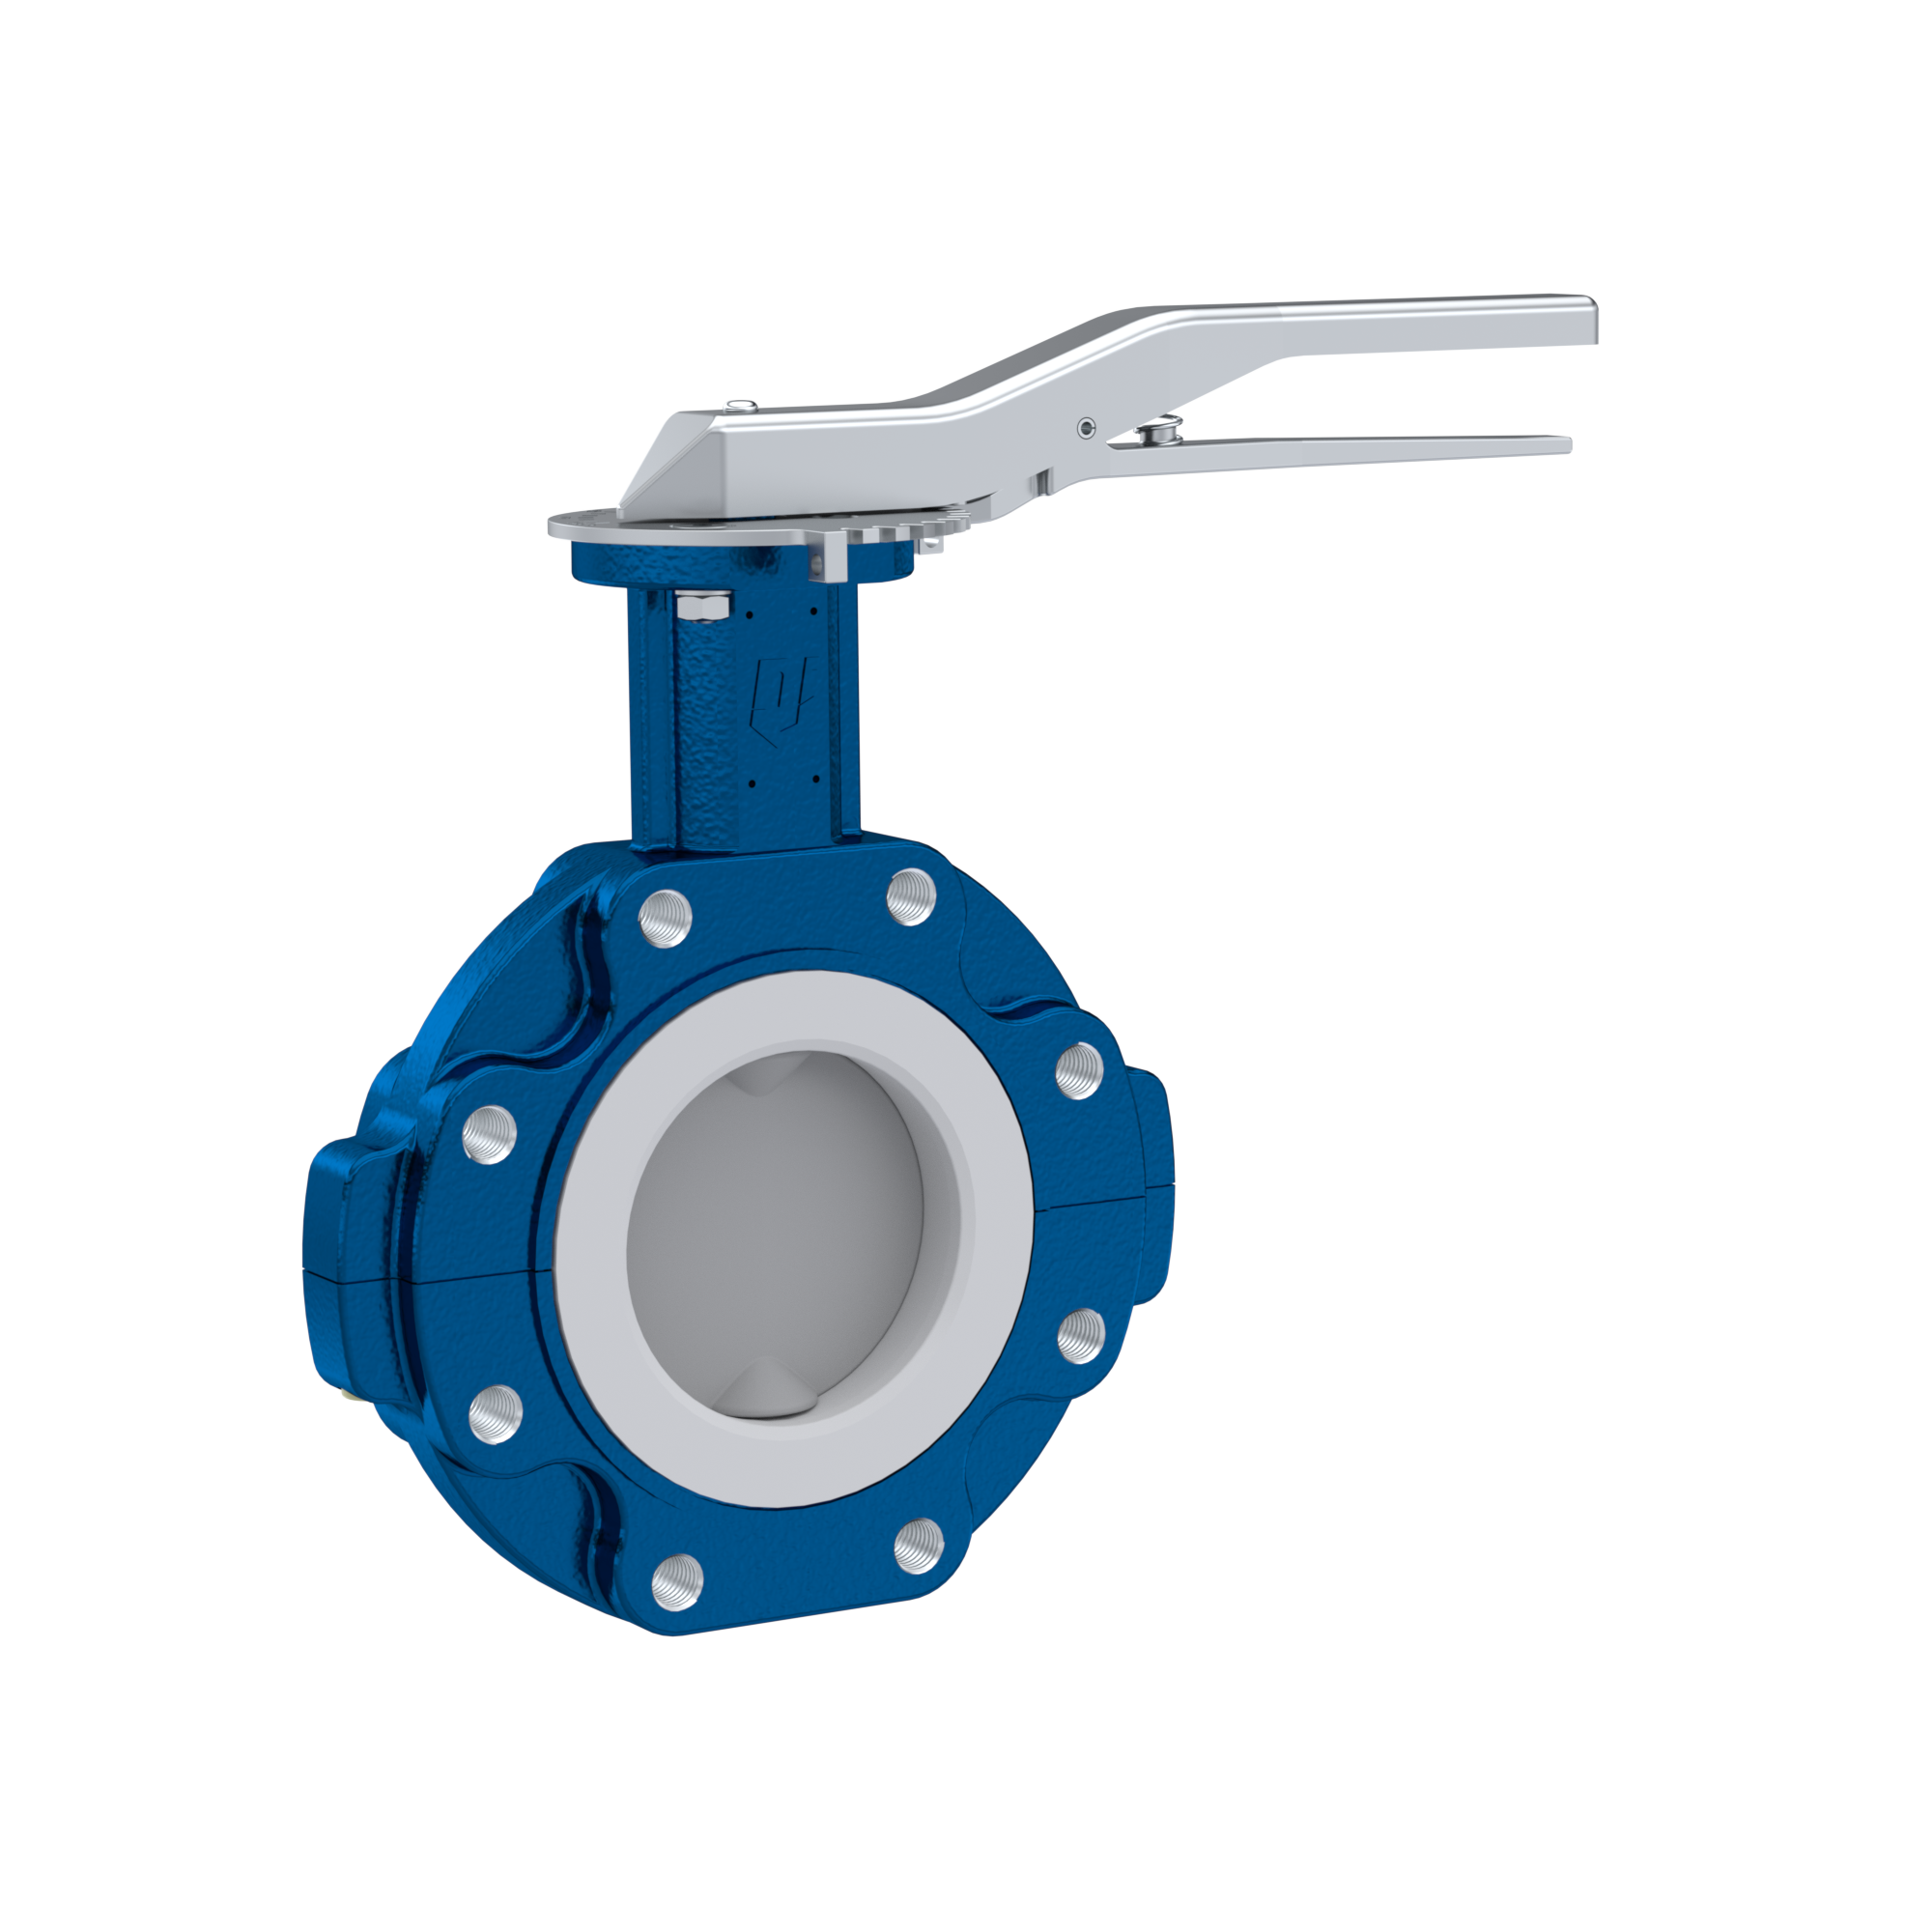 Butterfly-valve PTFE AK10 DN125 ANSI150 lever silicone insert